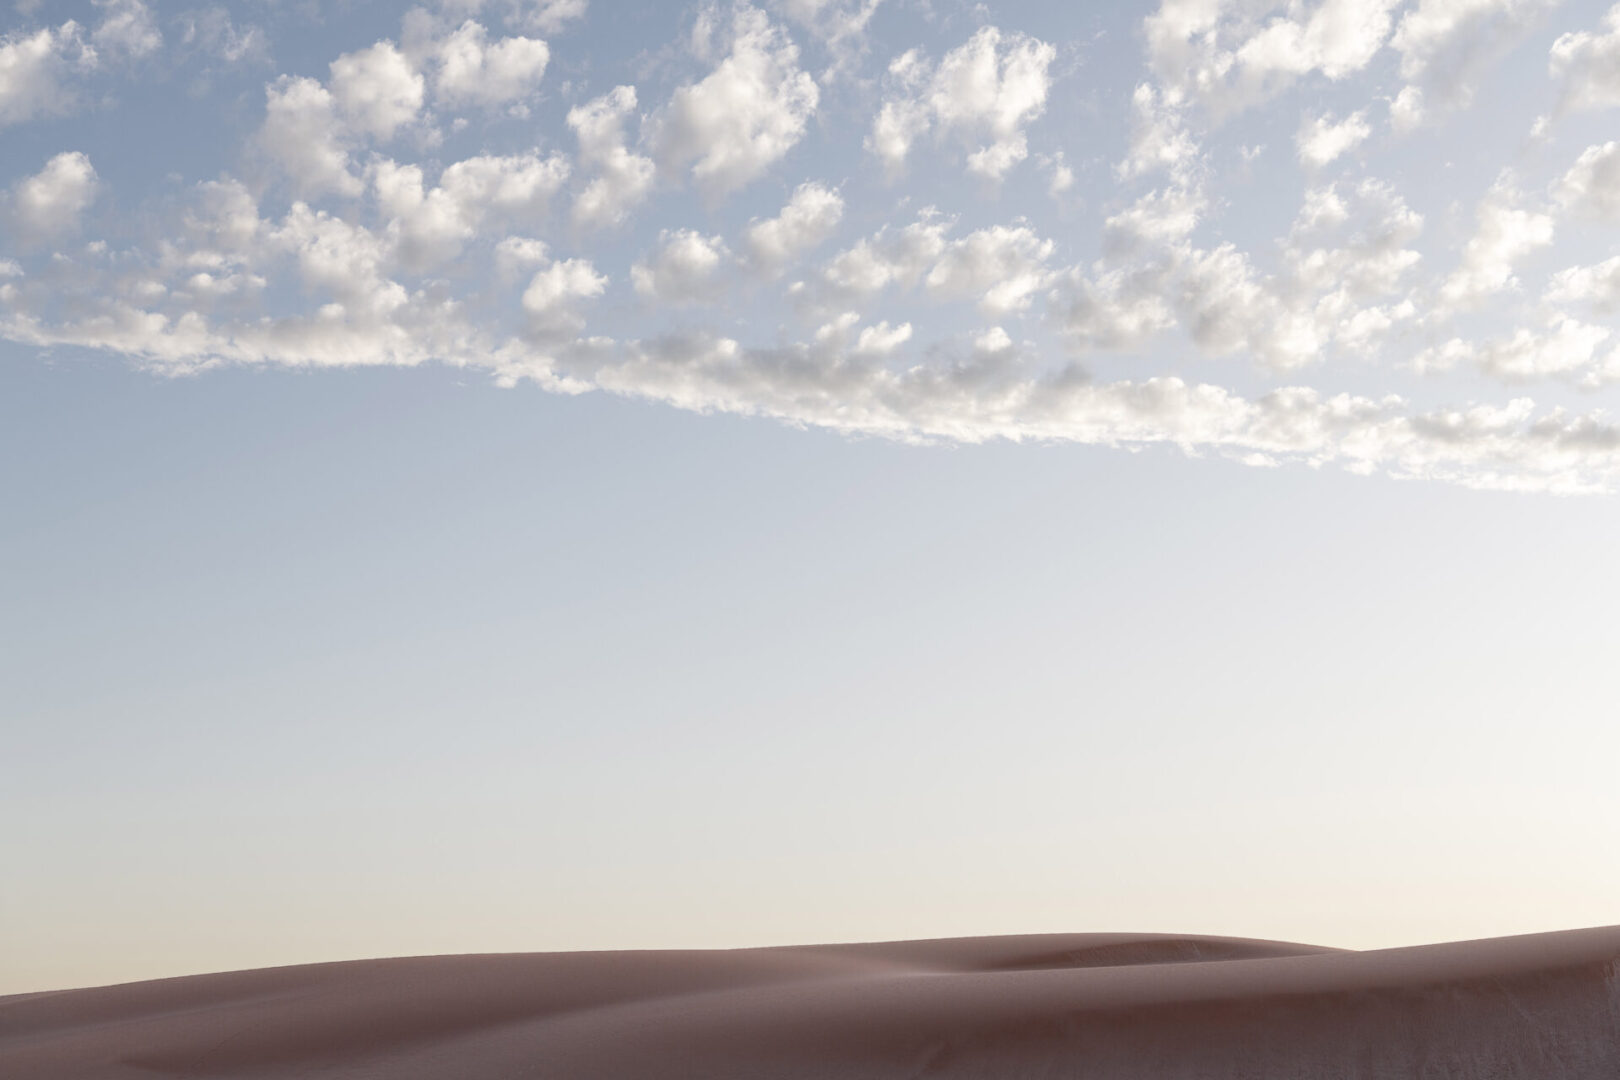 A desert landscape with clouds in the sky.